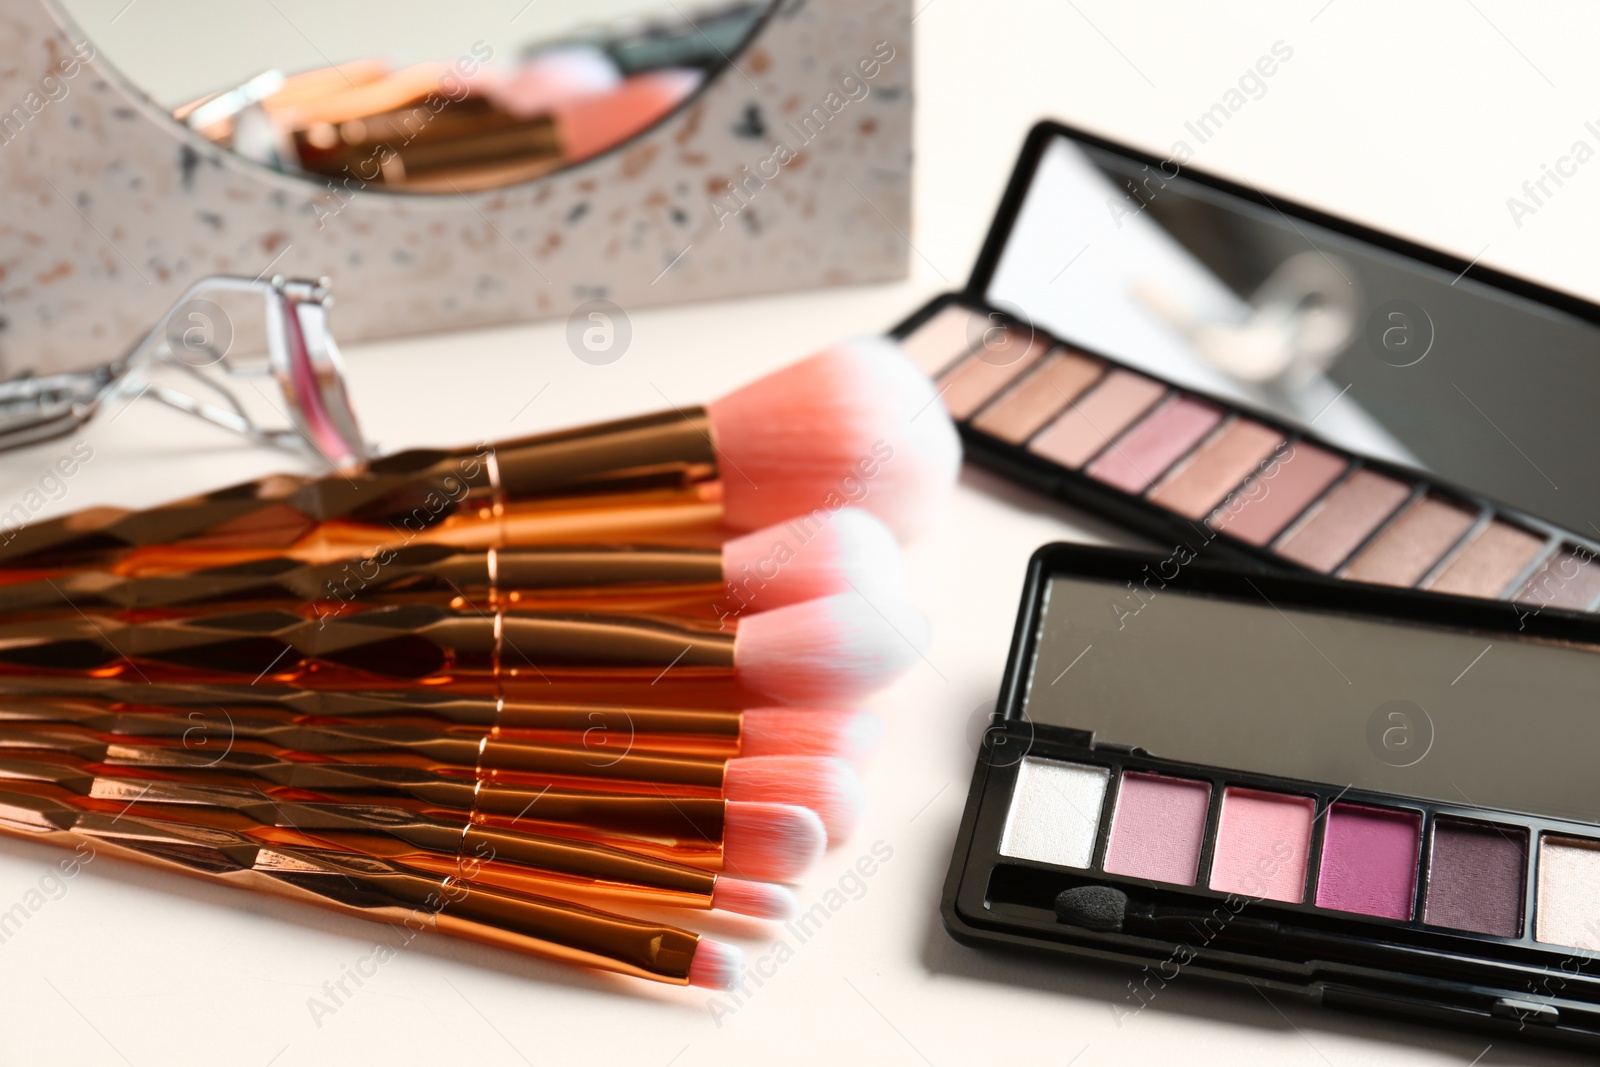 Photo of Set of makeup brushes and eye shadow palette on table